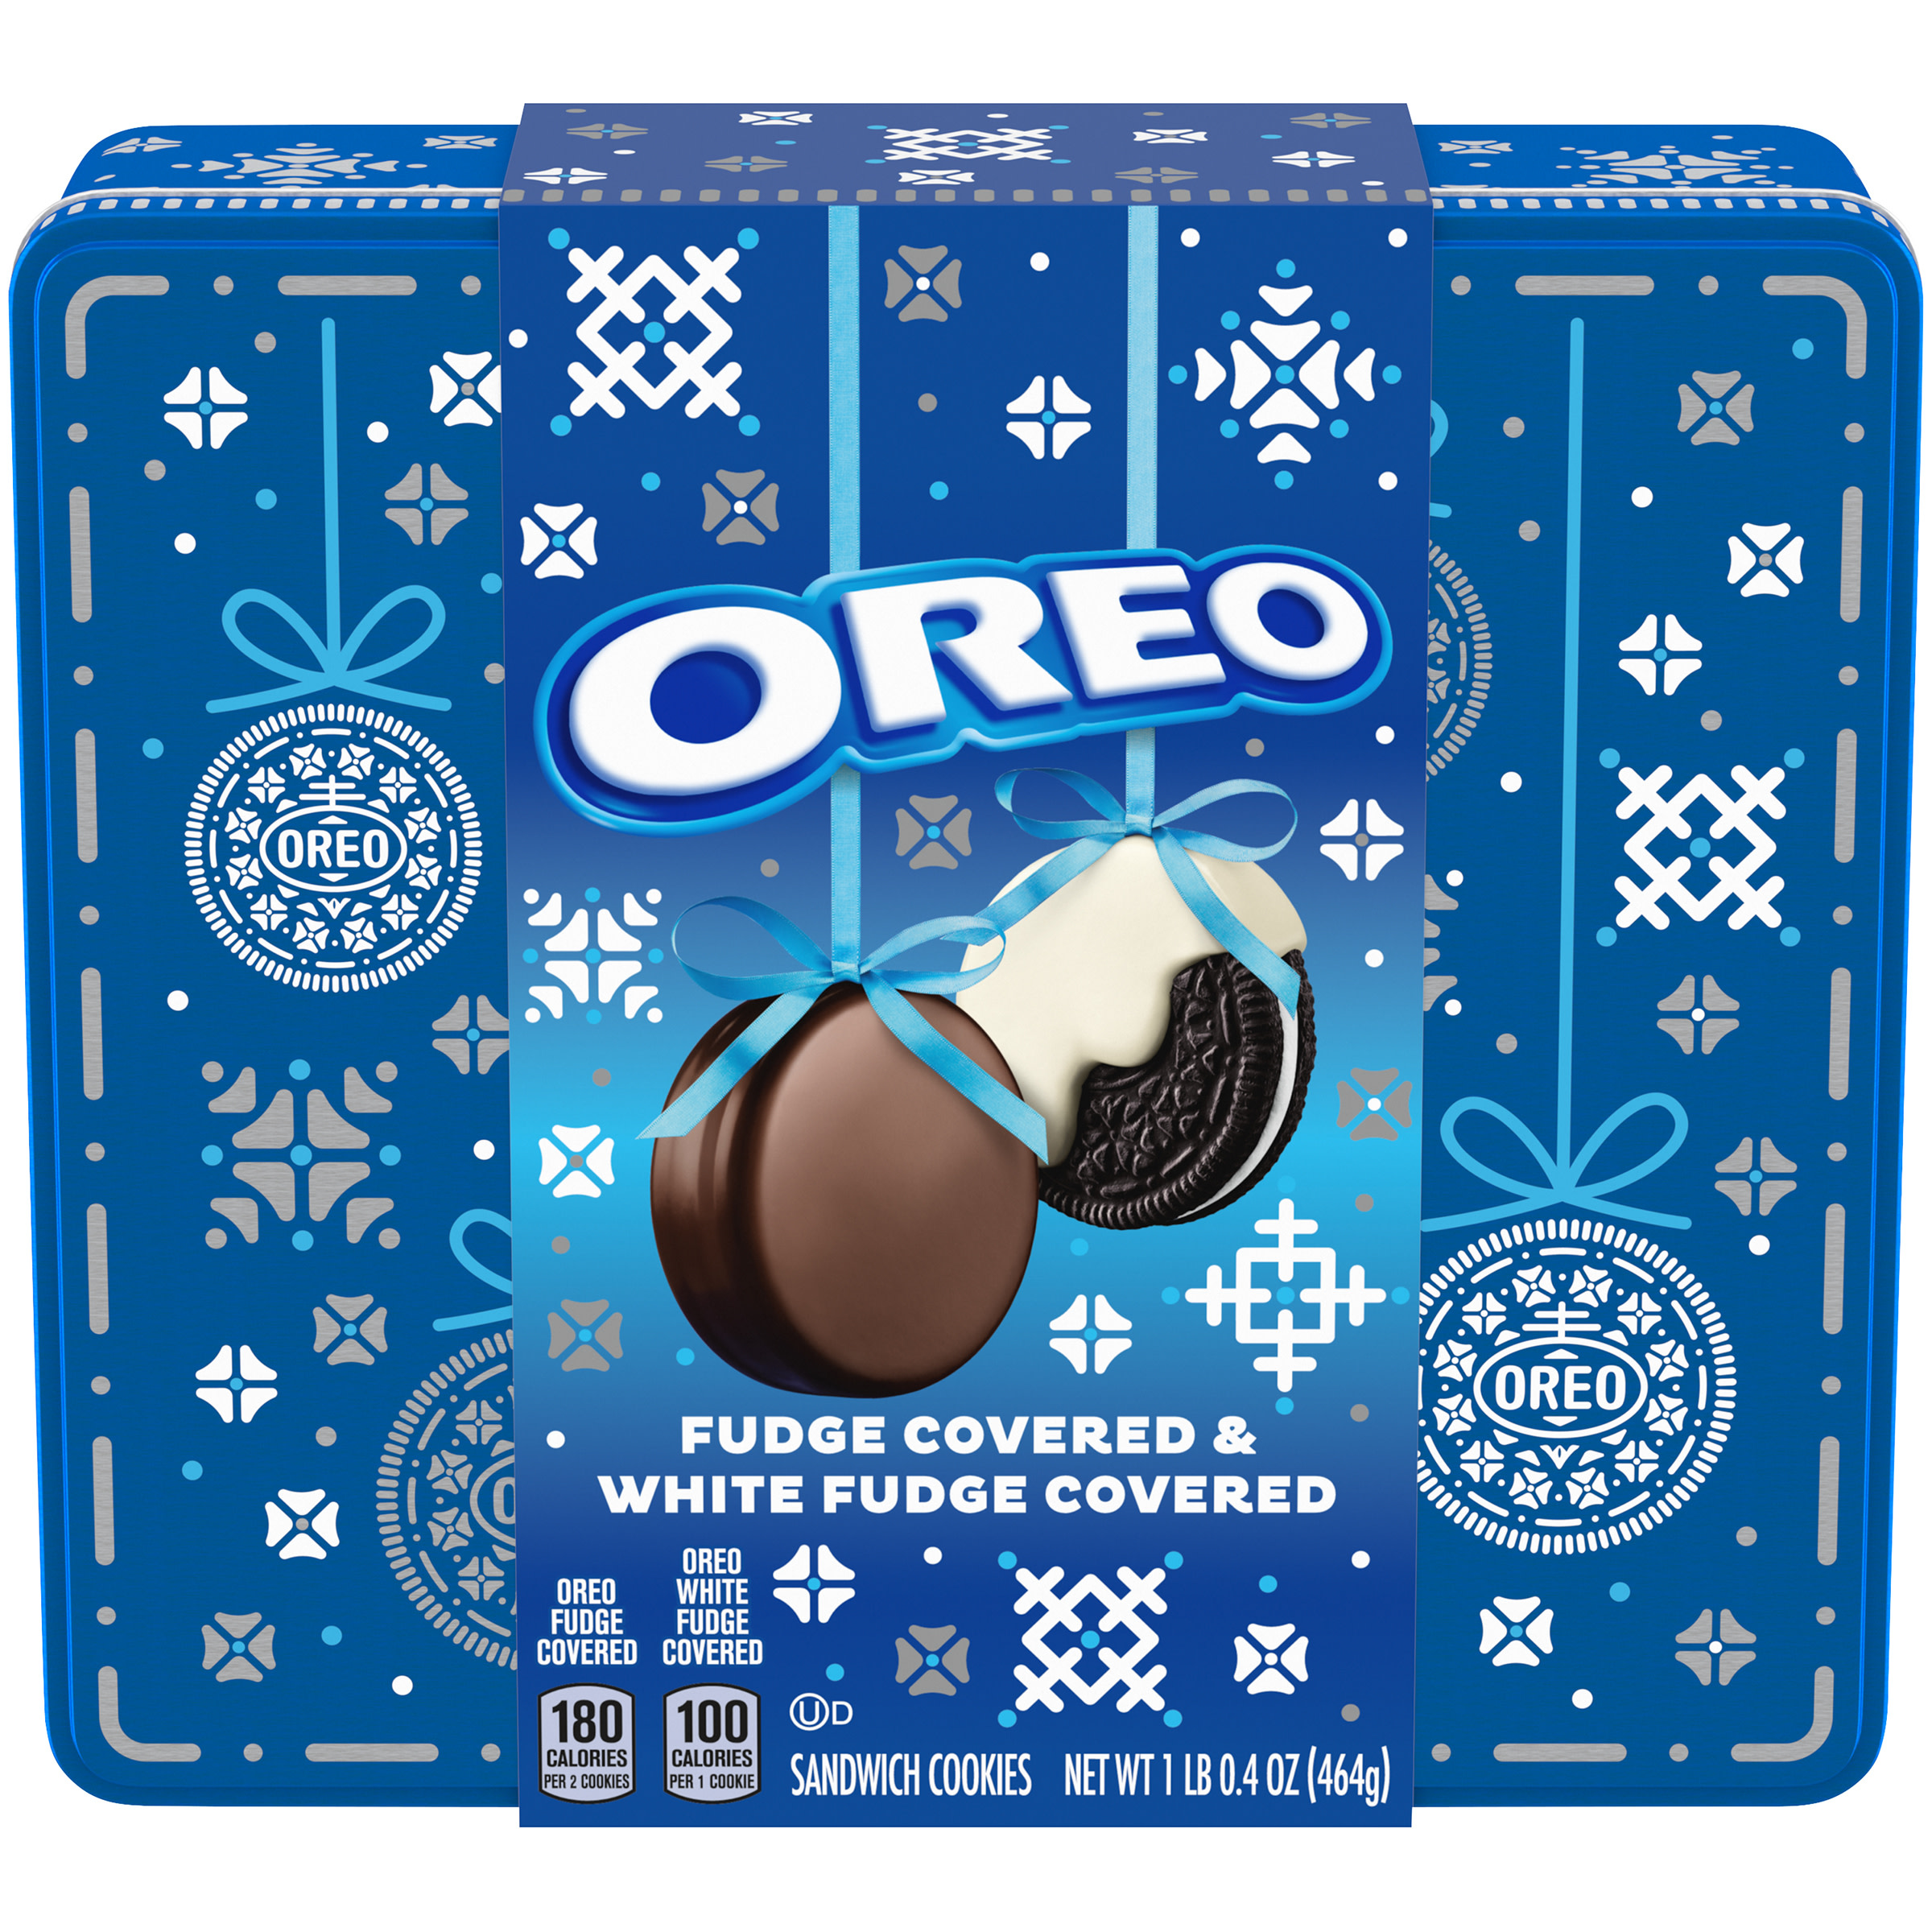 Oreo Fudge Covered & White Fudge Covered Sandwich Holiday Cookies, 1.03 Lb Holiday Tin (24 Cookies) - image 1 of 9